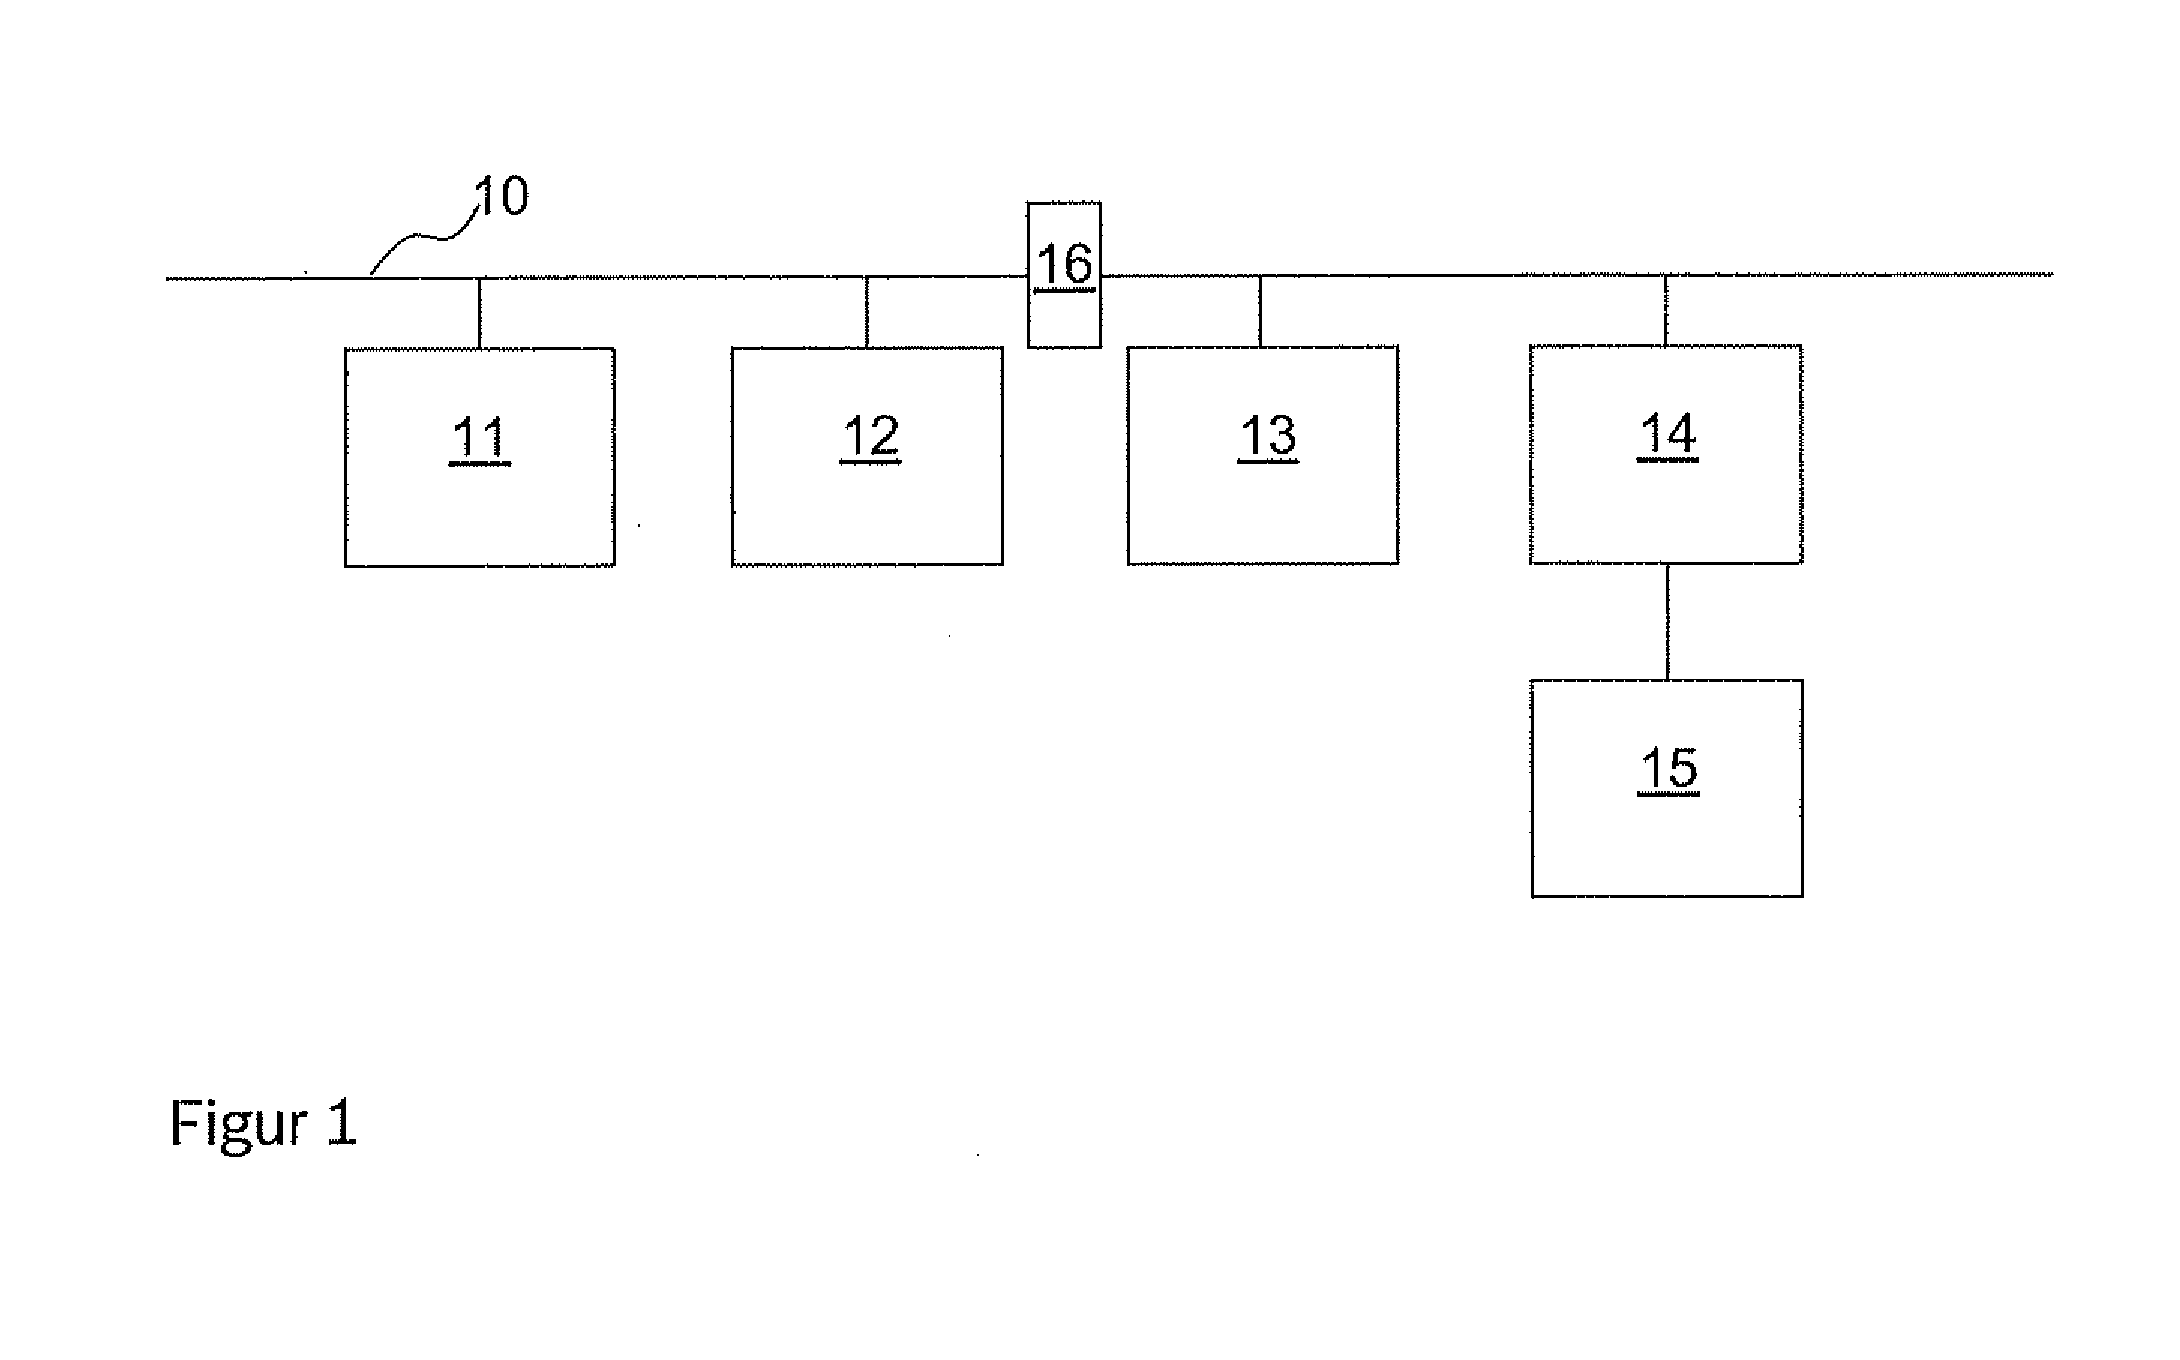 Microcontroller having a computing unit and a logic circuit, and method for carrying out computations by a microcontroller for a regulation or a control in a vehicle